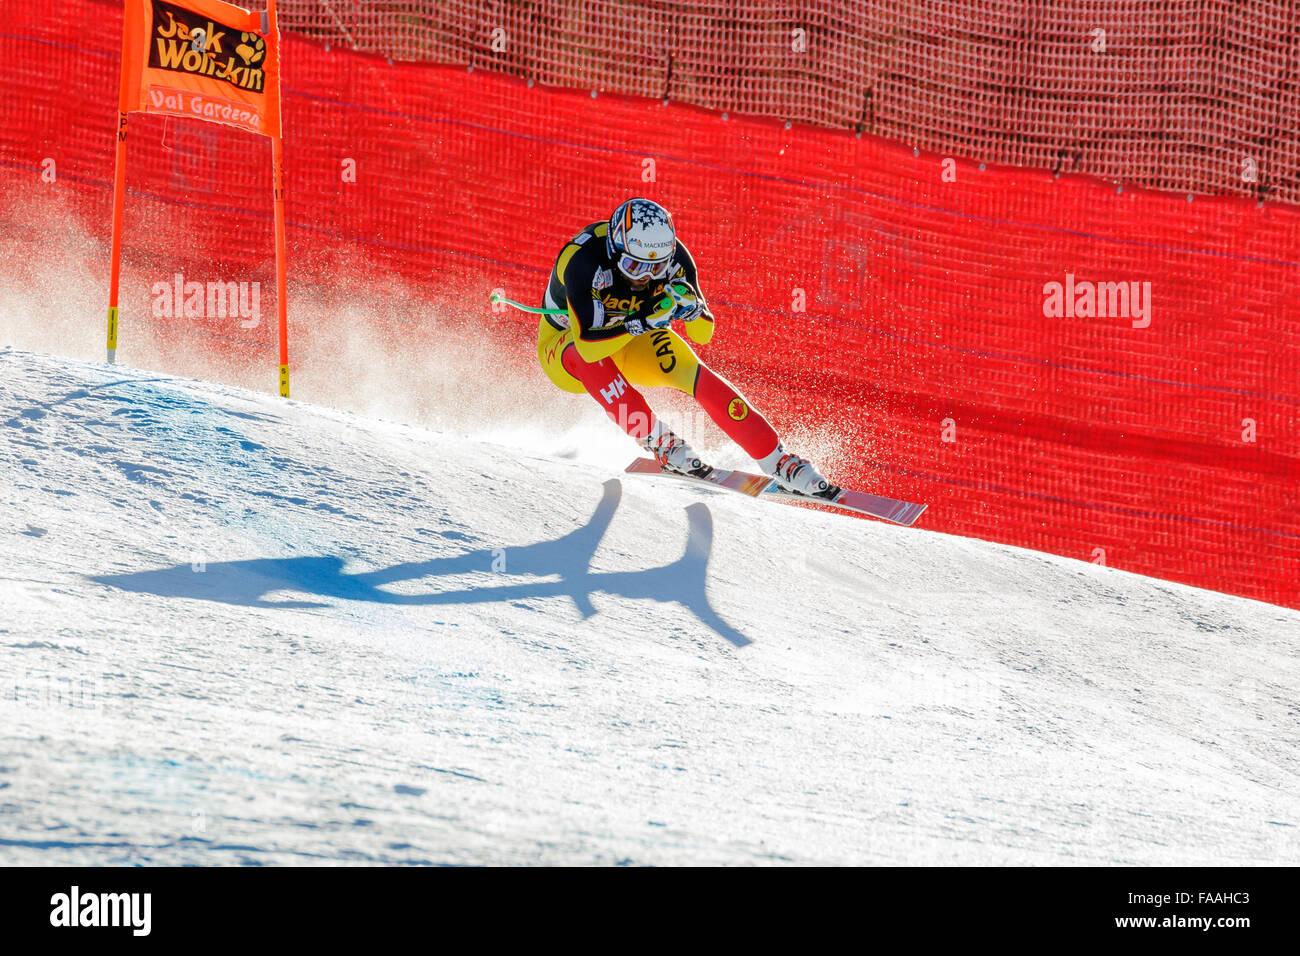 Val Gardena, Italy 19 December 2015. OSBORNE-PARADIS Manuel (Can) competing in the Audi Fis Alpine Skiing World Cup Men's Stock Photo